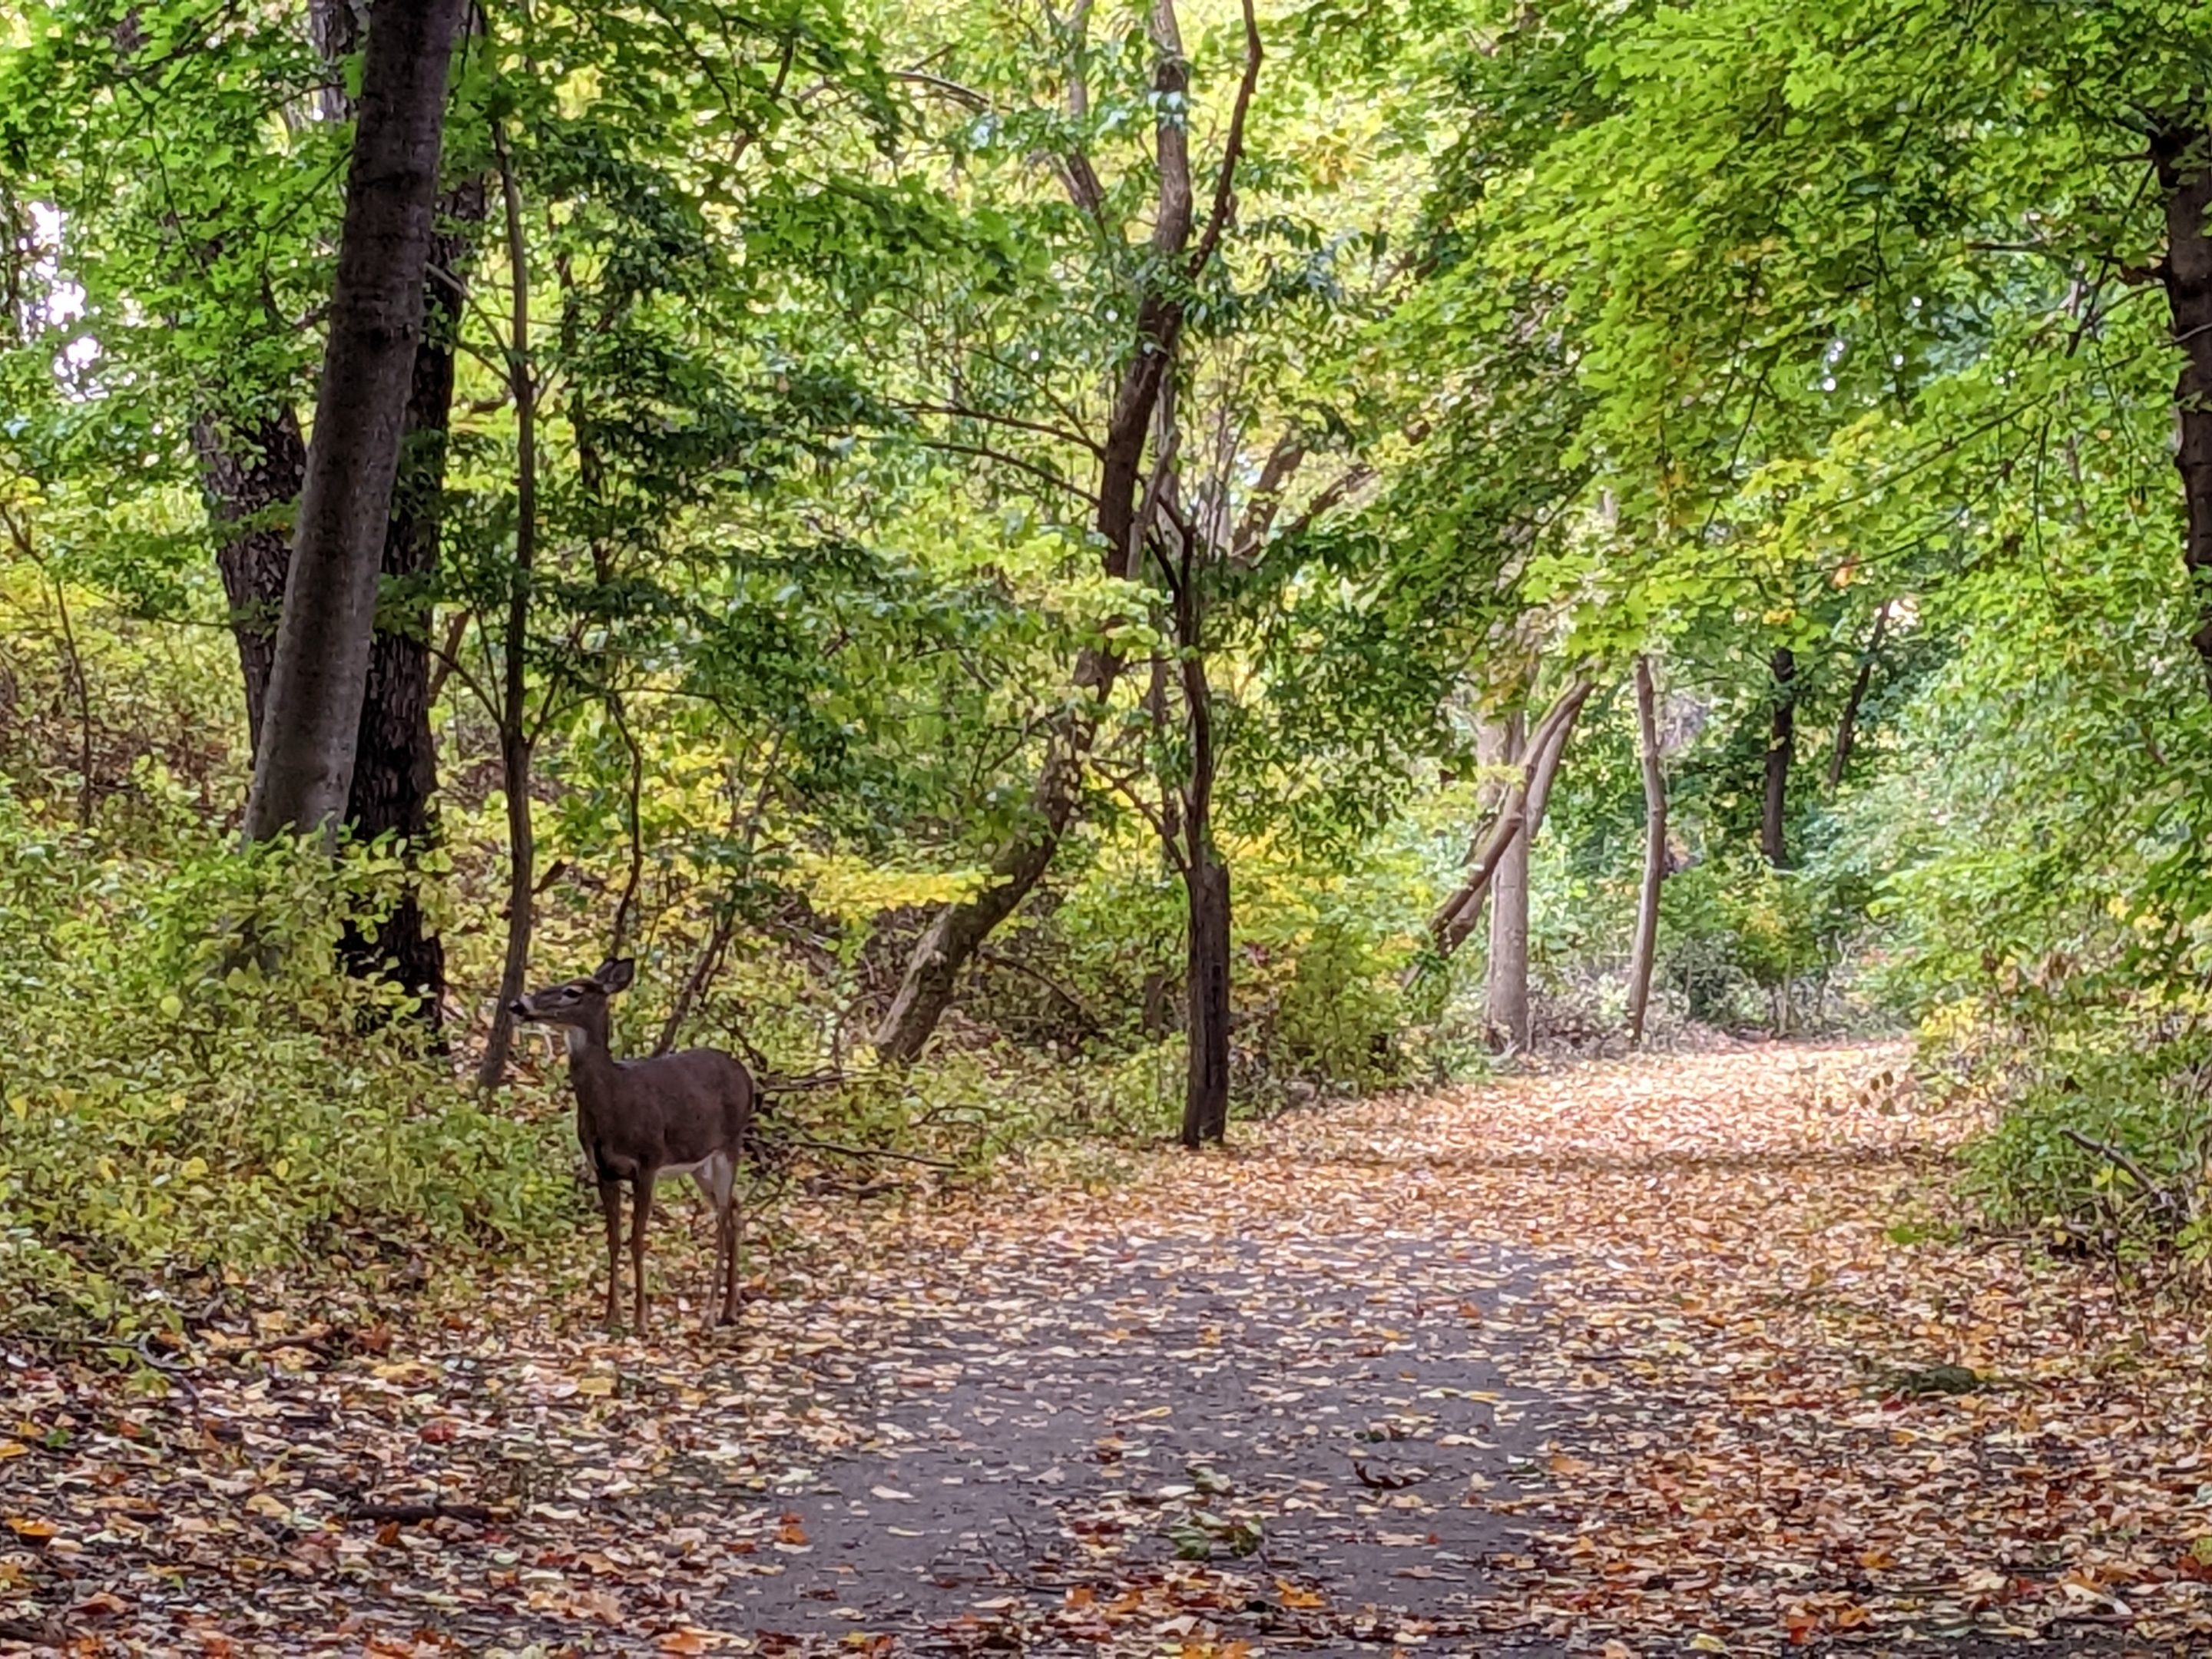 A white-tailed deer along the Hojack Trail, which has some fall leaves on it